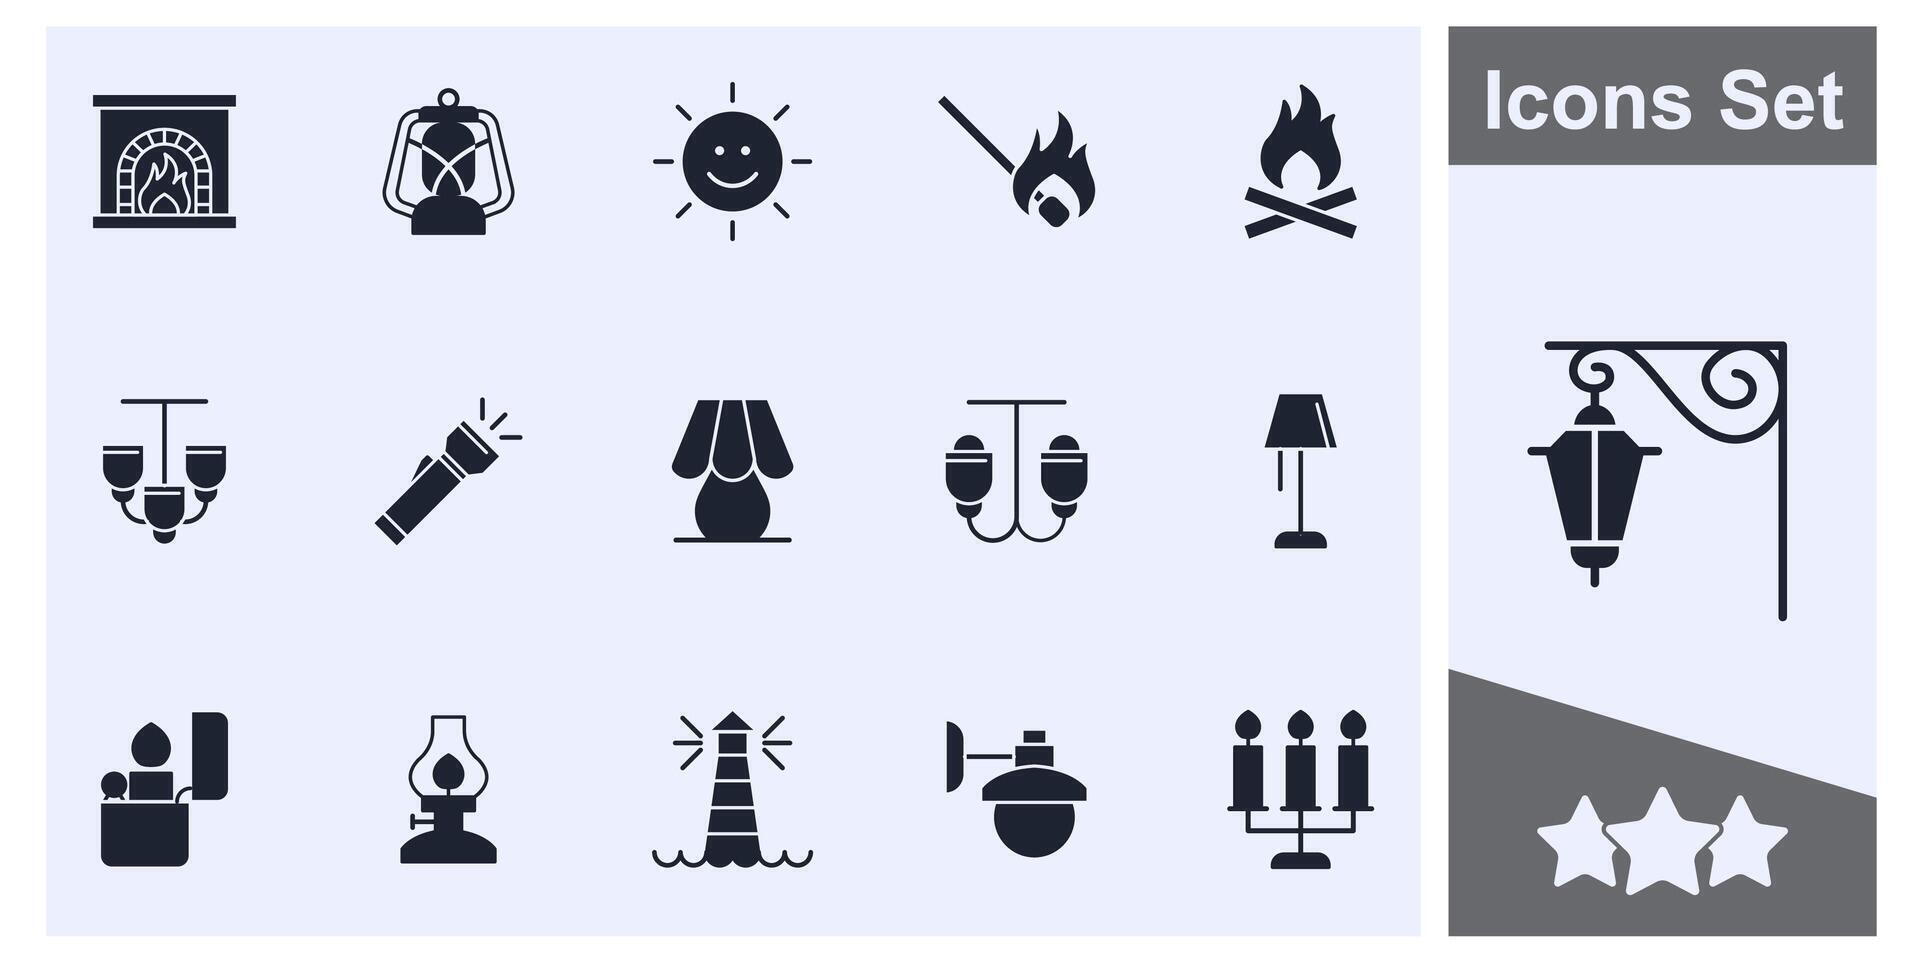 Lights, bulb, lamp icon set symbol collection, logo isolated illustration vector